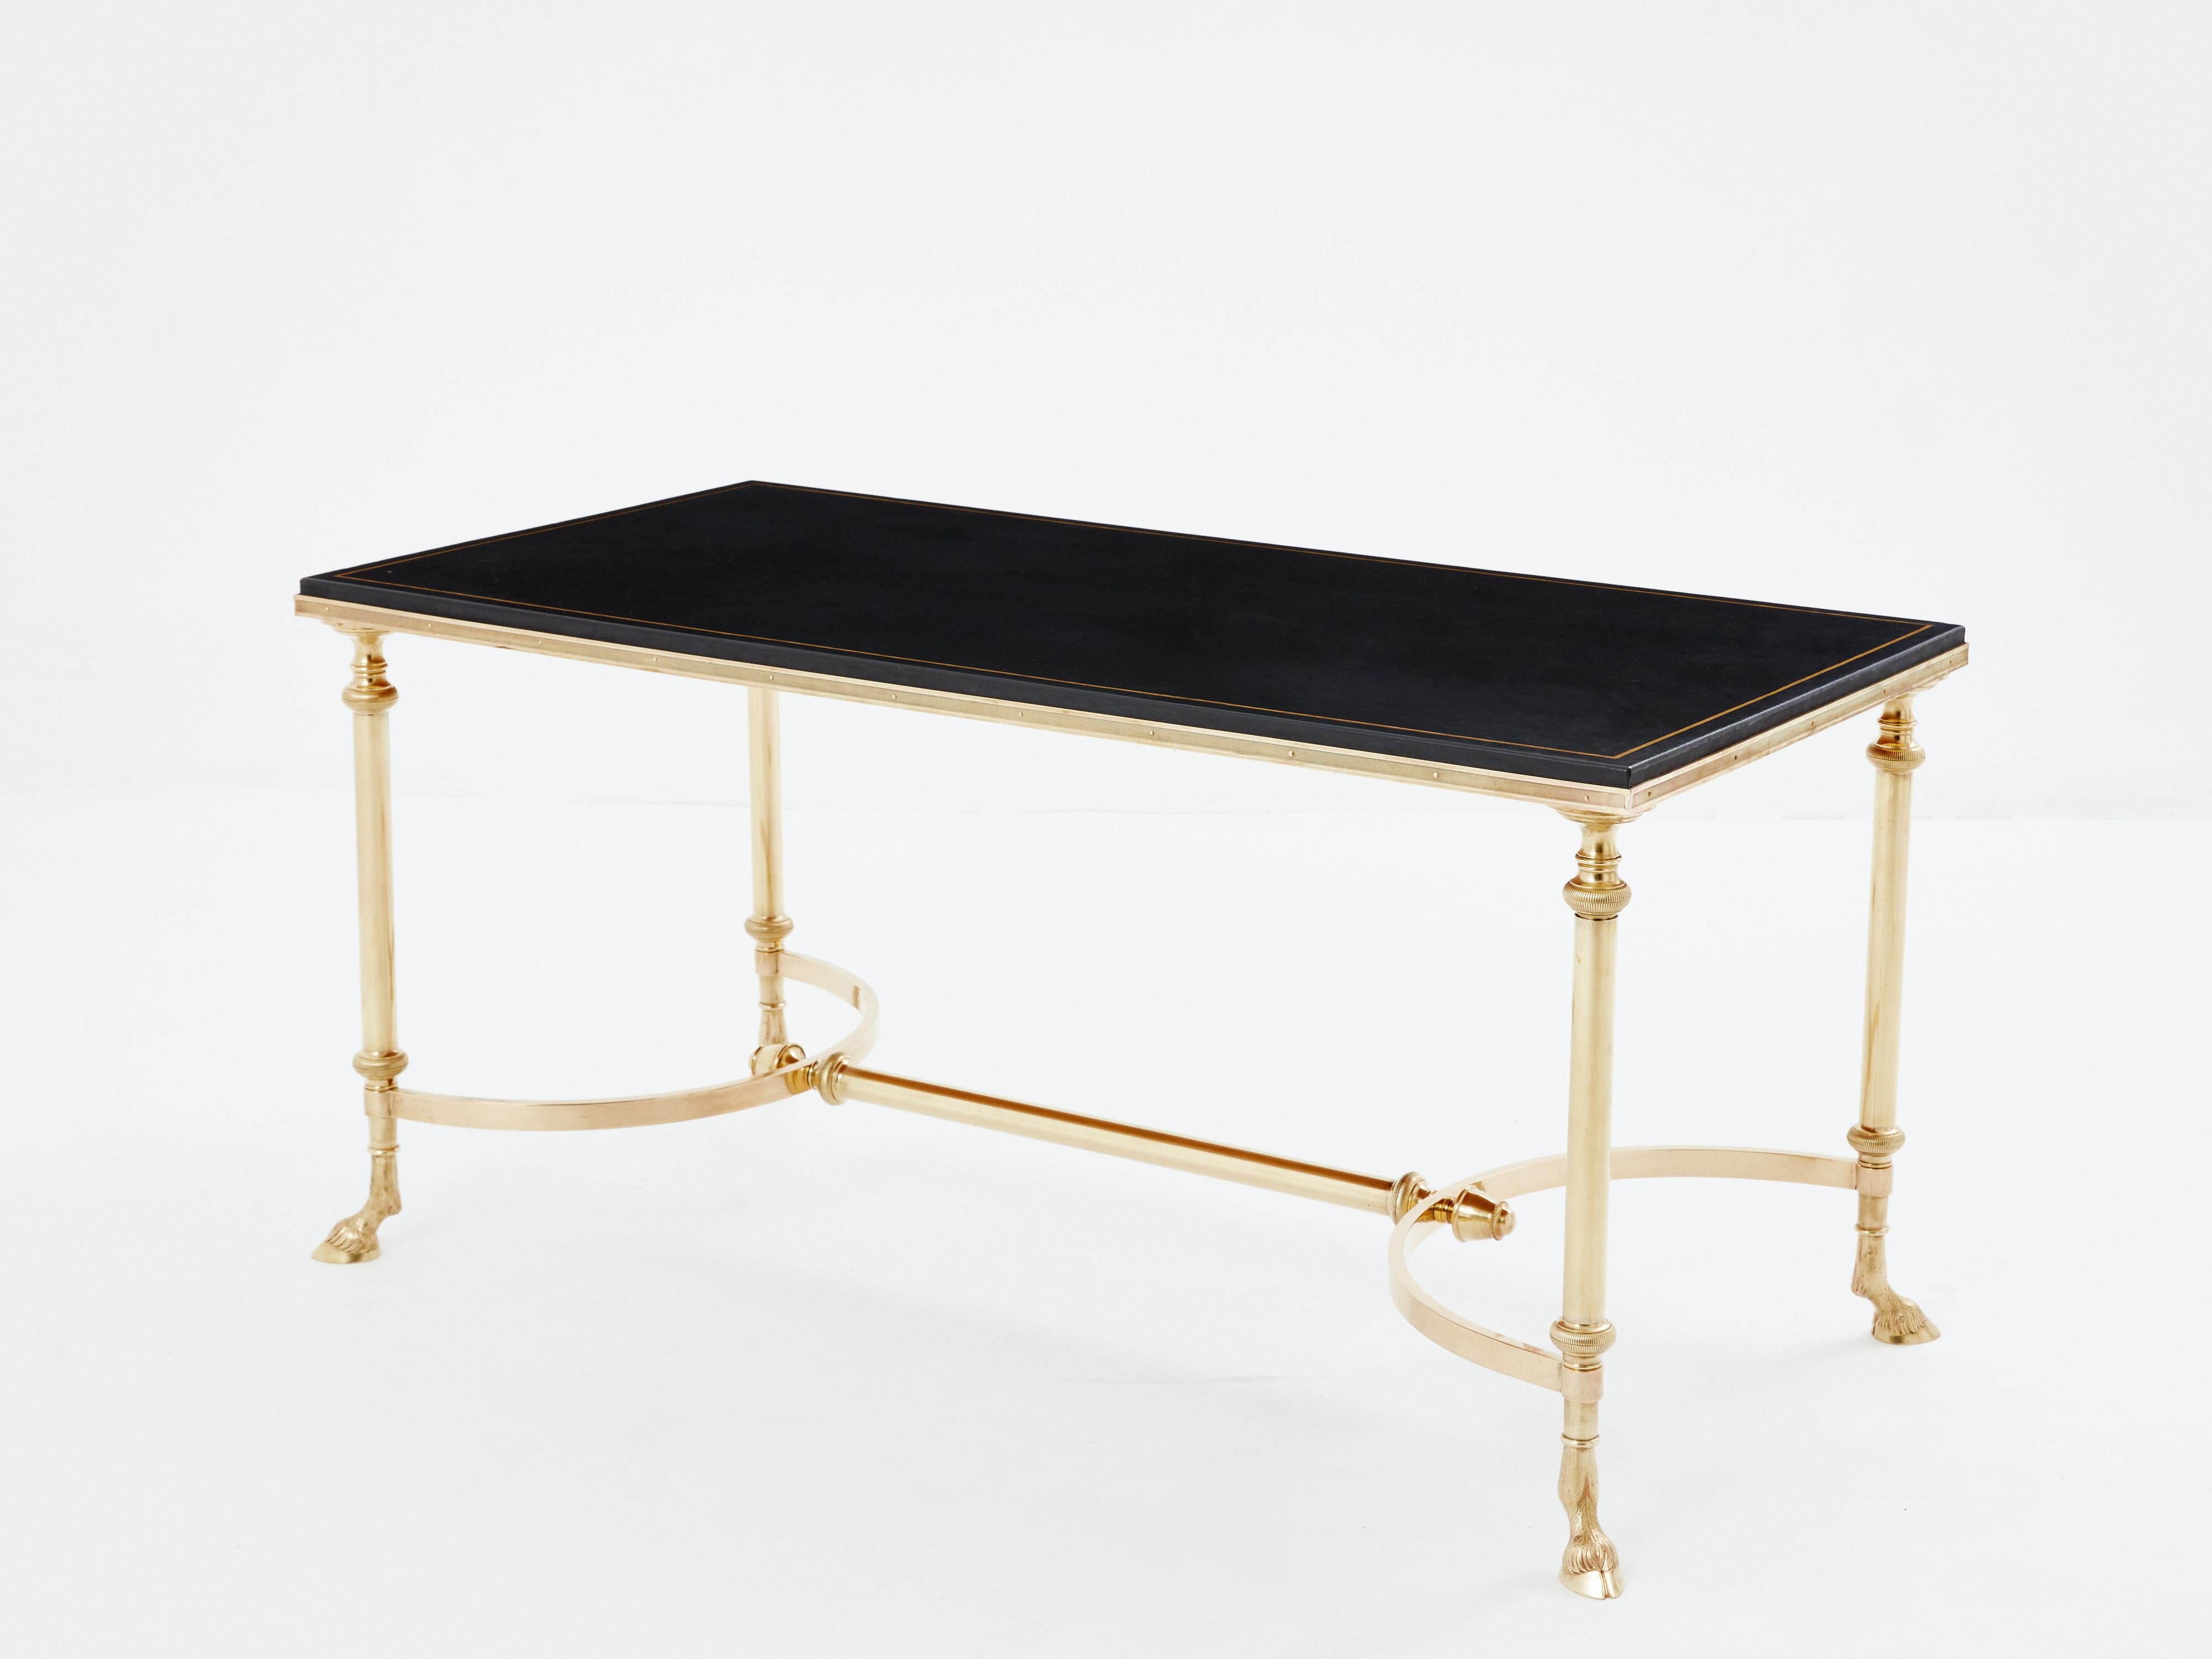 This beautiful coffee table by Maison Charles was produced with solid brass and black leather top in the early 1970s. The table is full of Neoclassical character, with its structure, goat hooves, and leather top. It has been fully restored, the